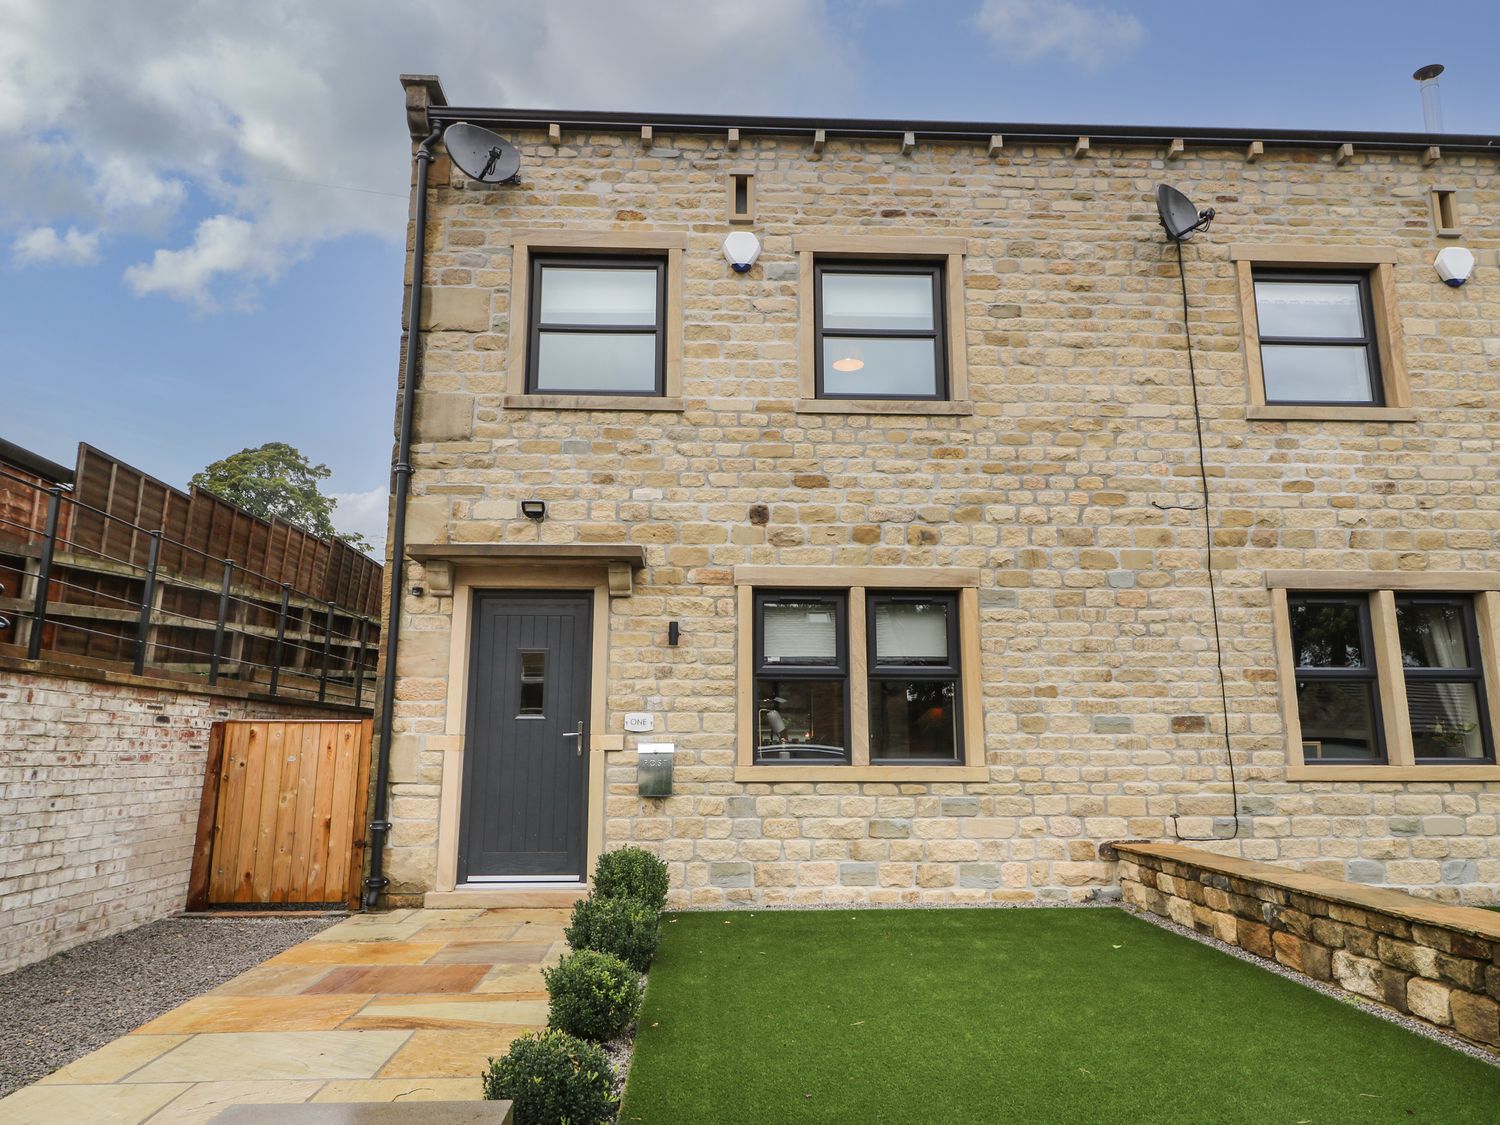 1 Stansfield Mews - Yorkshire Dales - 1086133 - photo 1